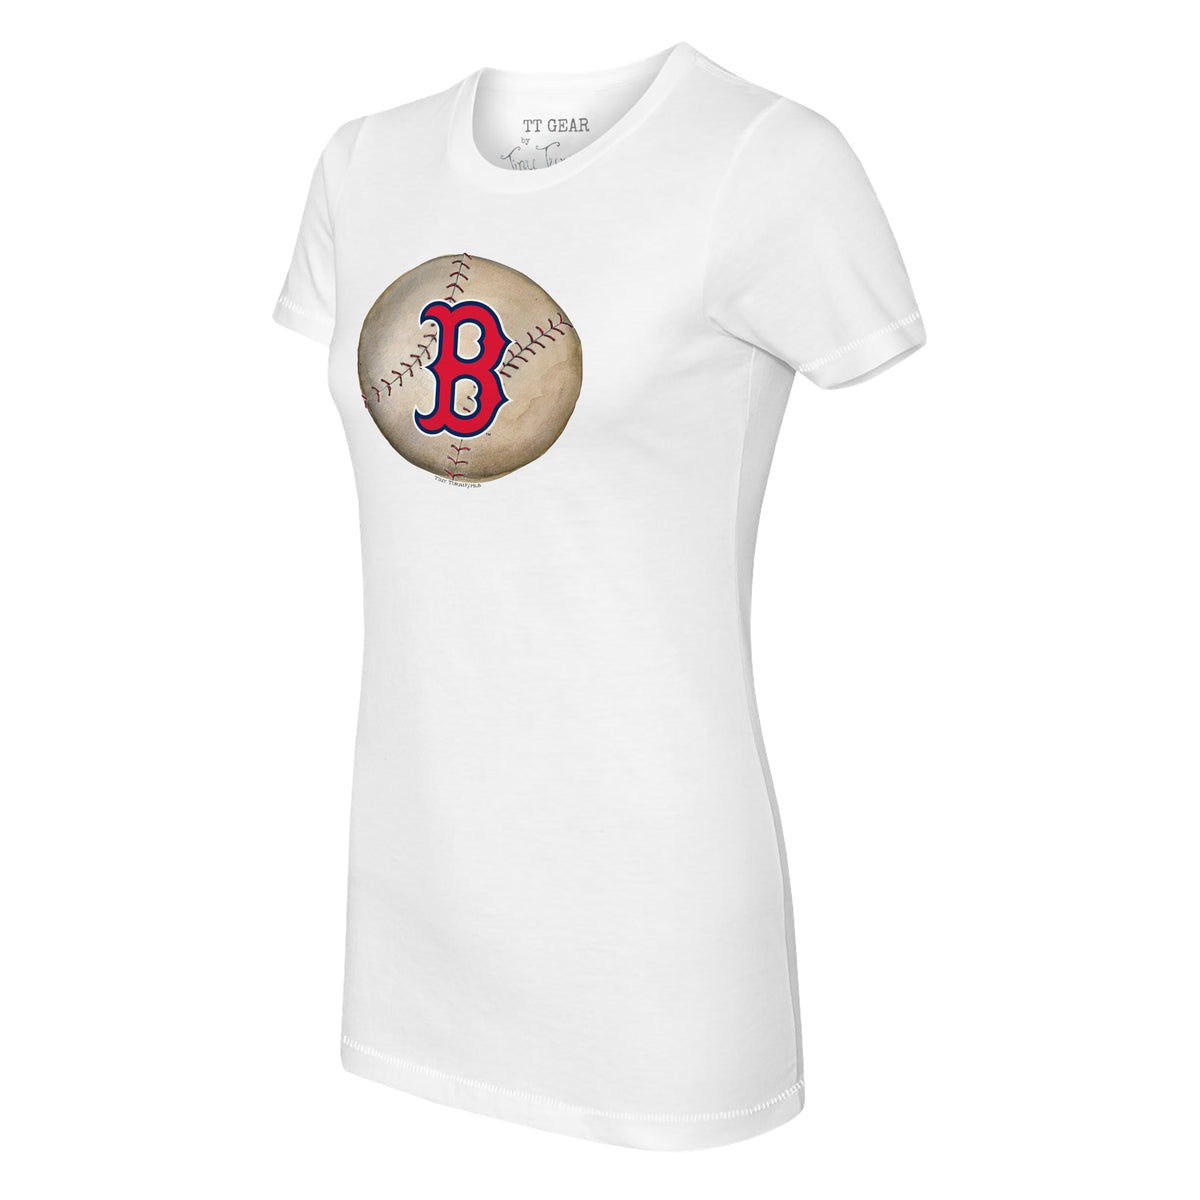 Boston Red Sox Stitched Baseball Tee Shirt 3T / Red